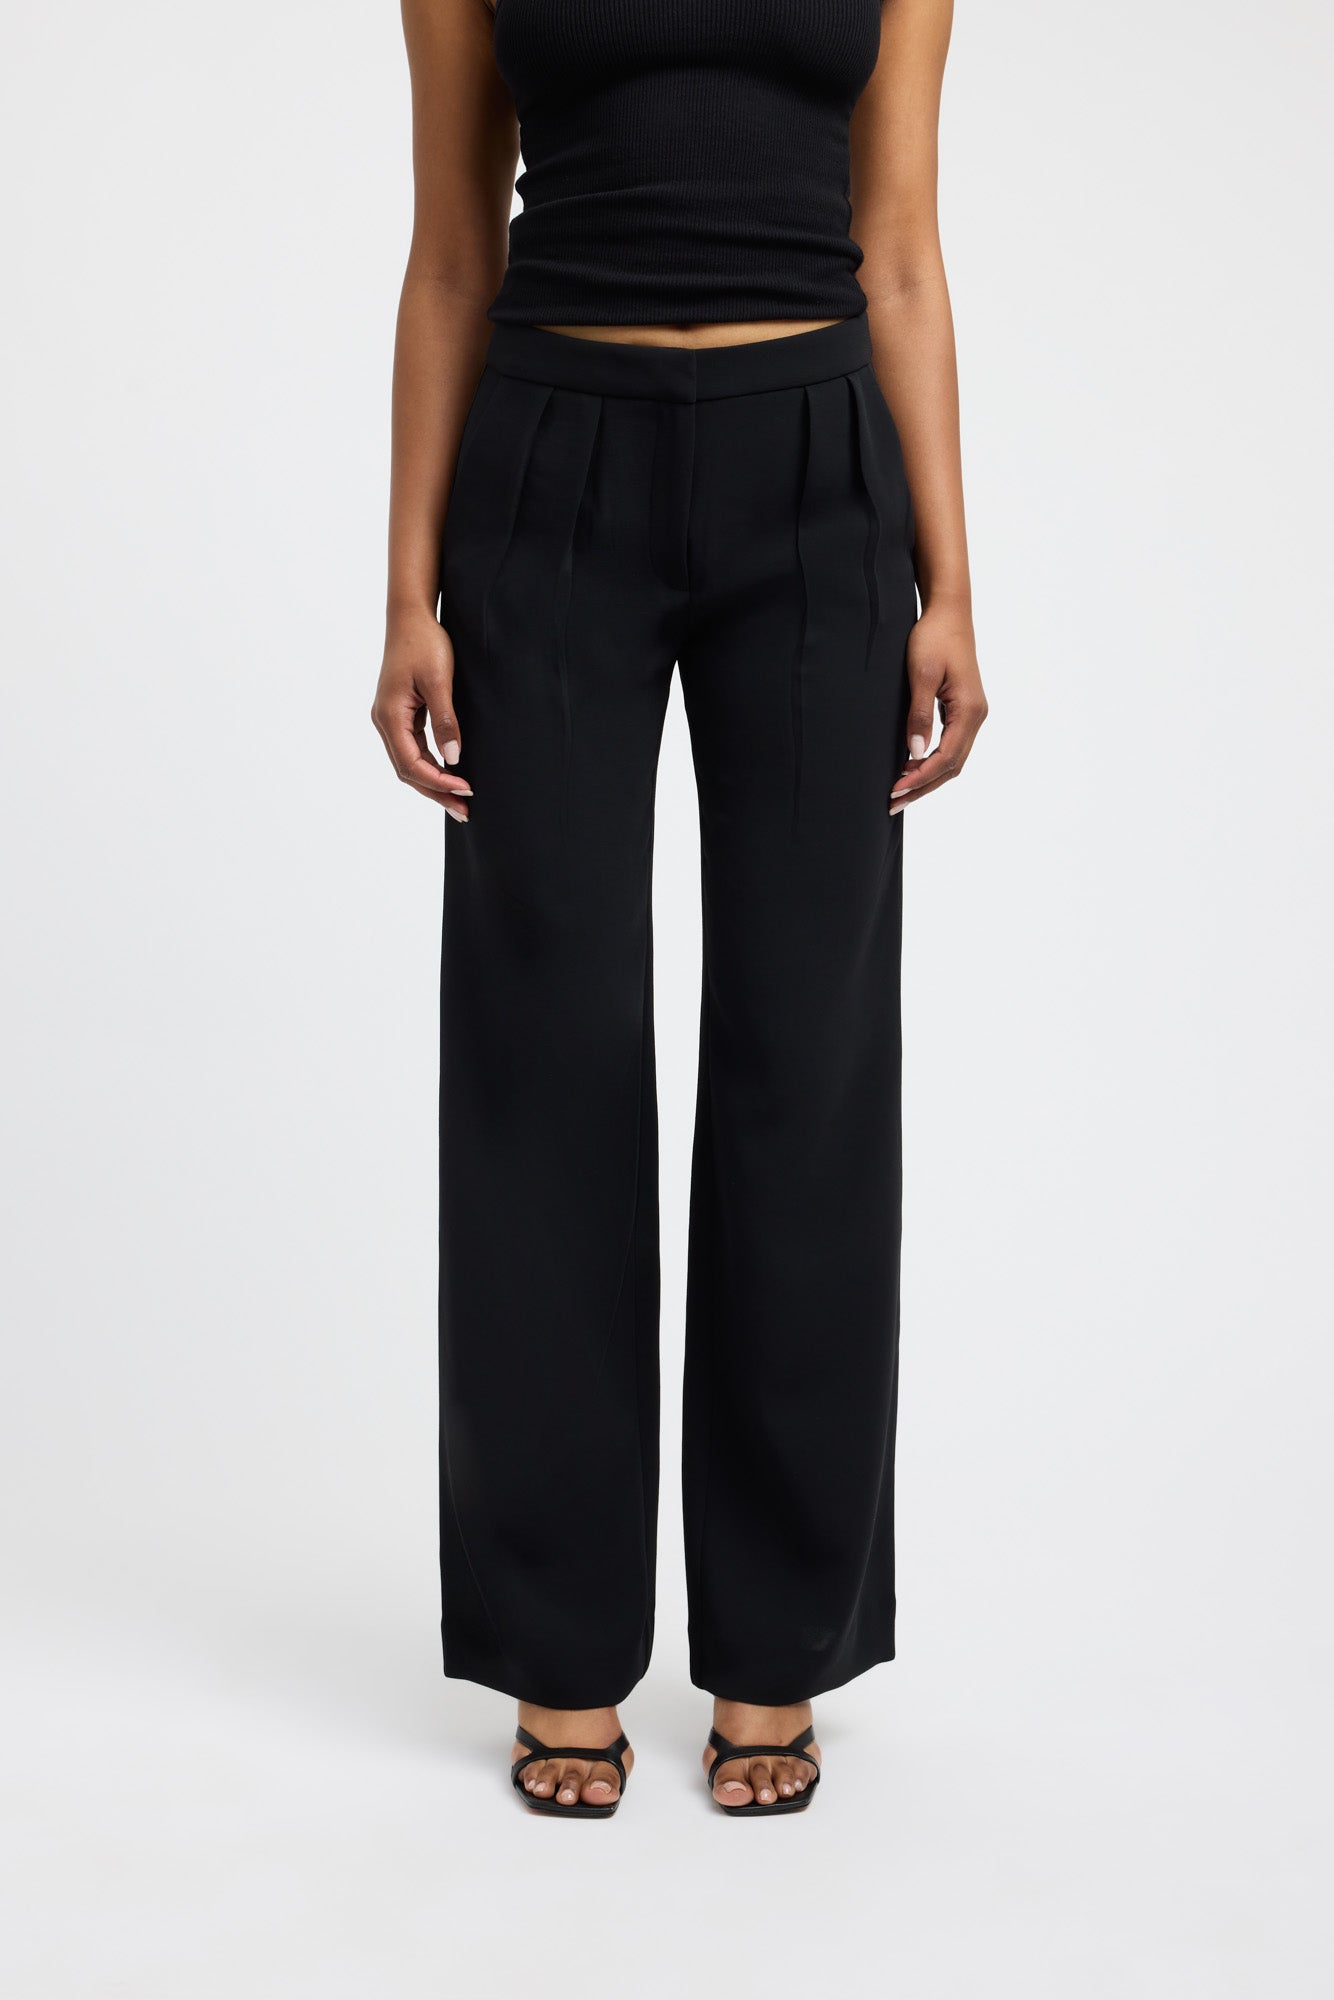 Juralle Low-Rise Tailored Pants | The Editor's Market